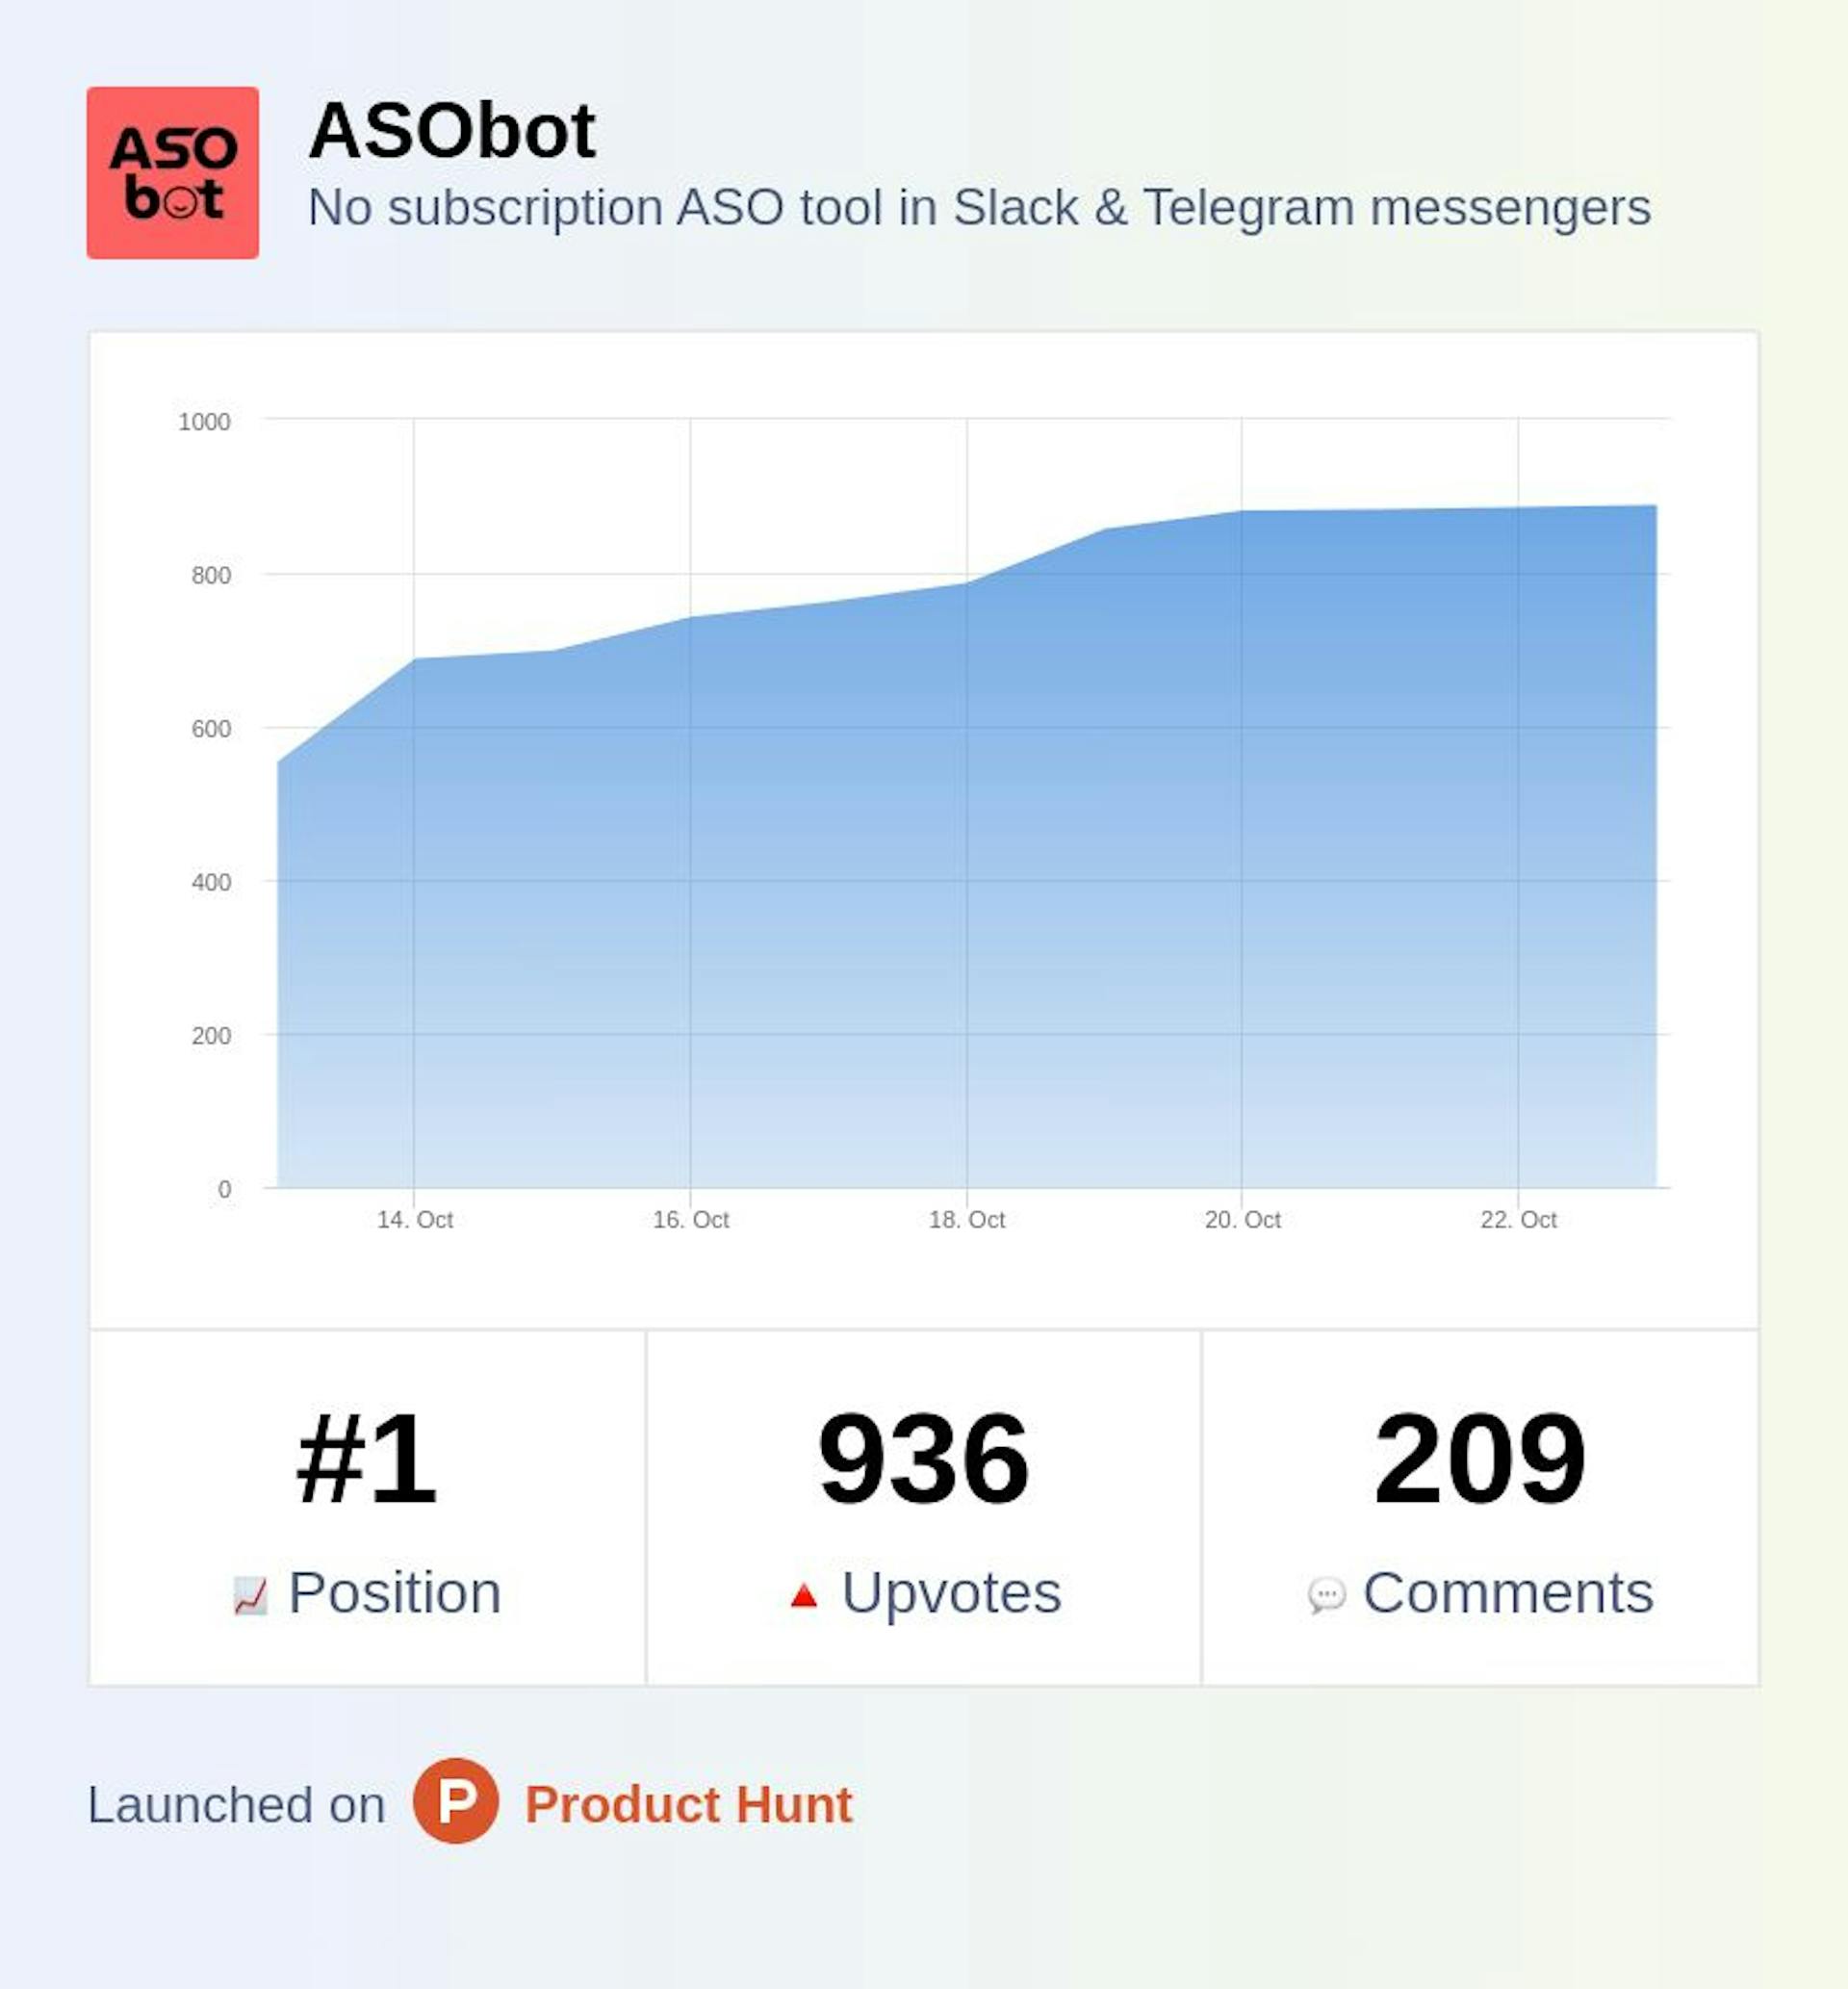 featured image - How ASObot Became 'Product of the Day' on Product Hunt And Why It Deserves to be There